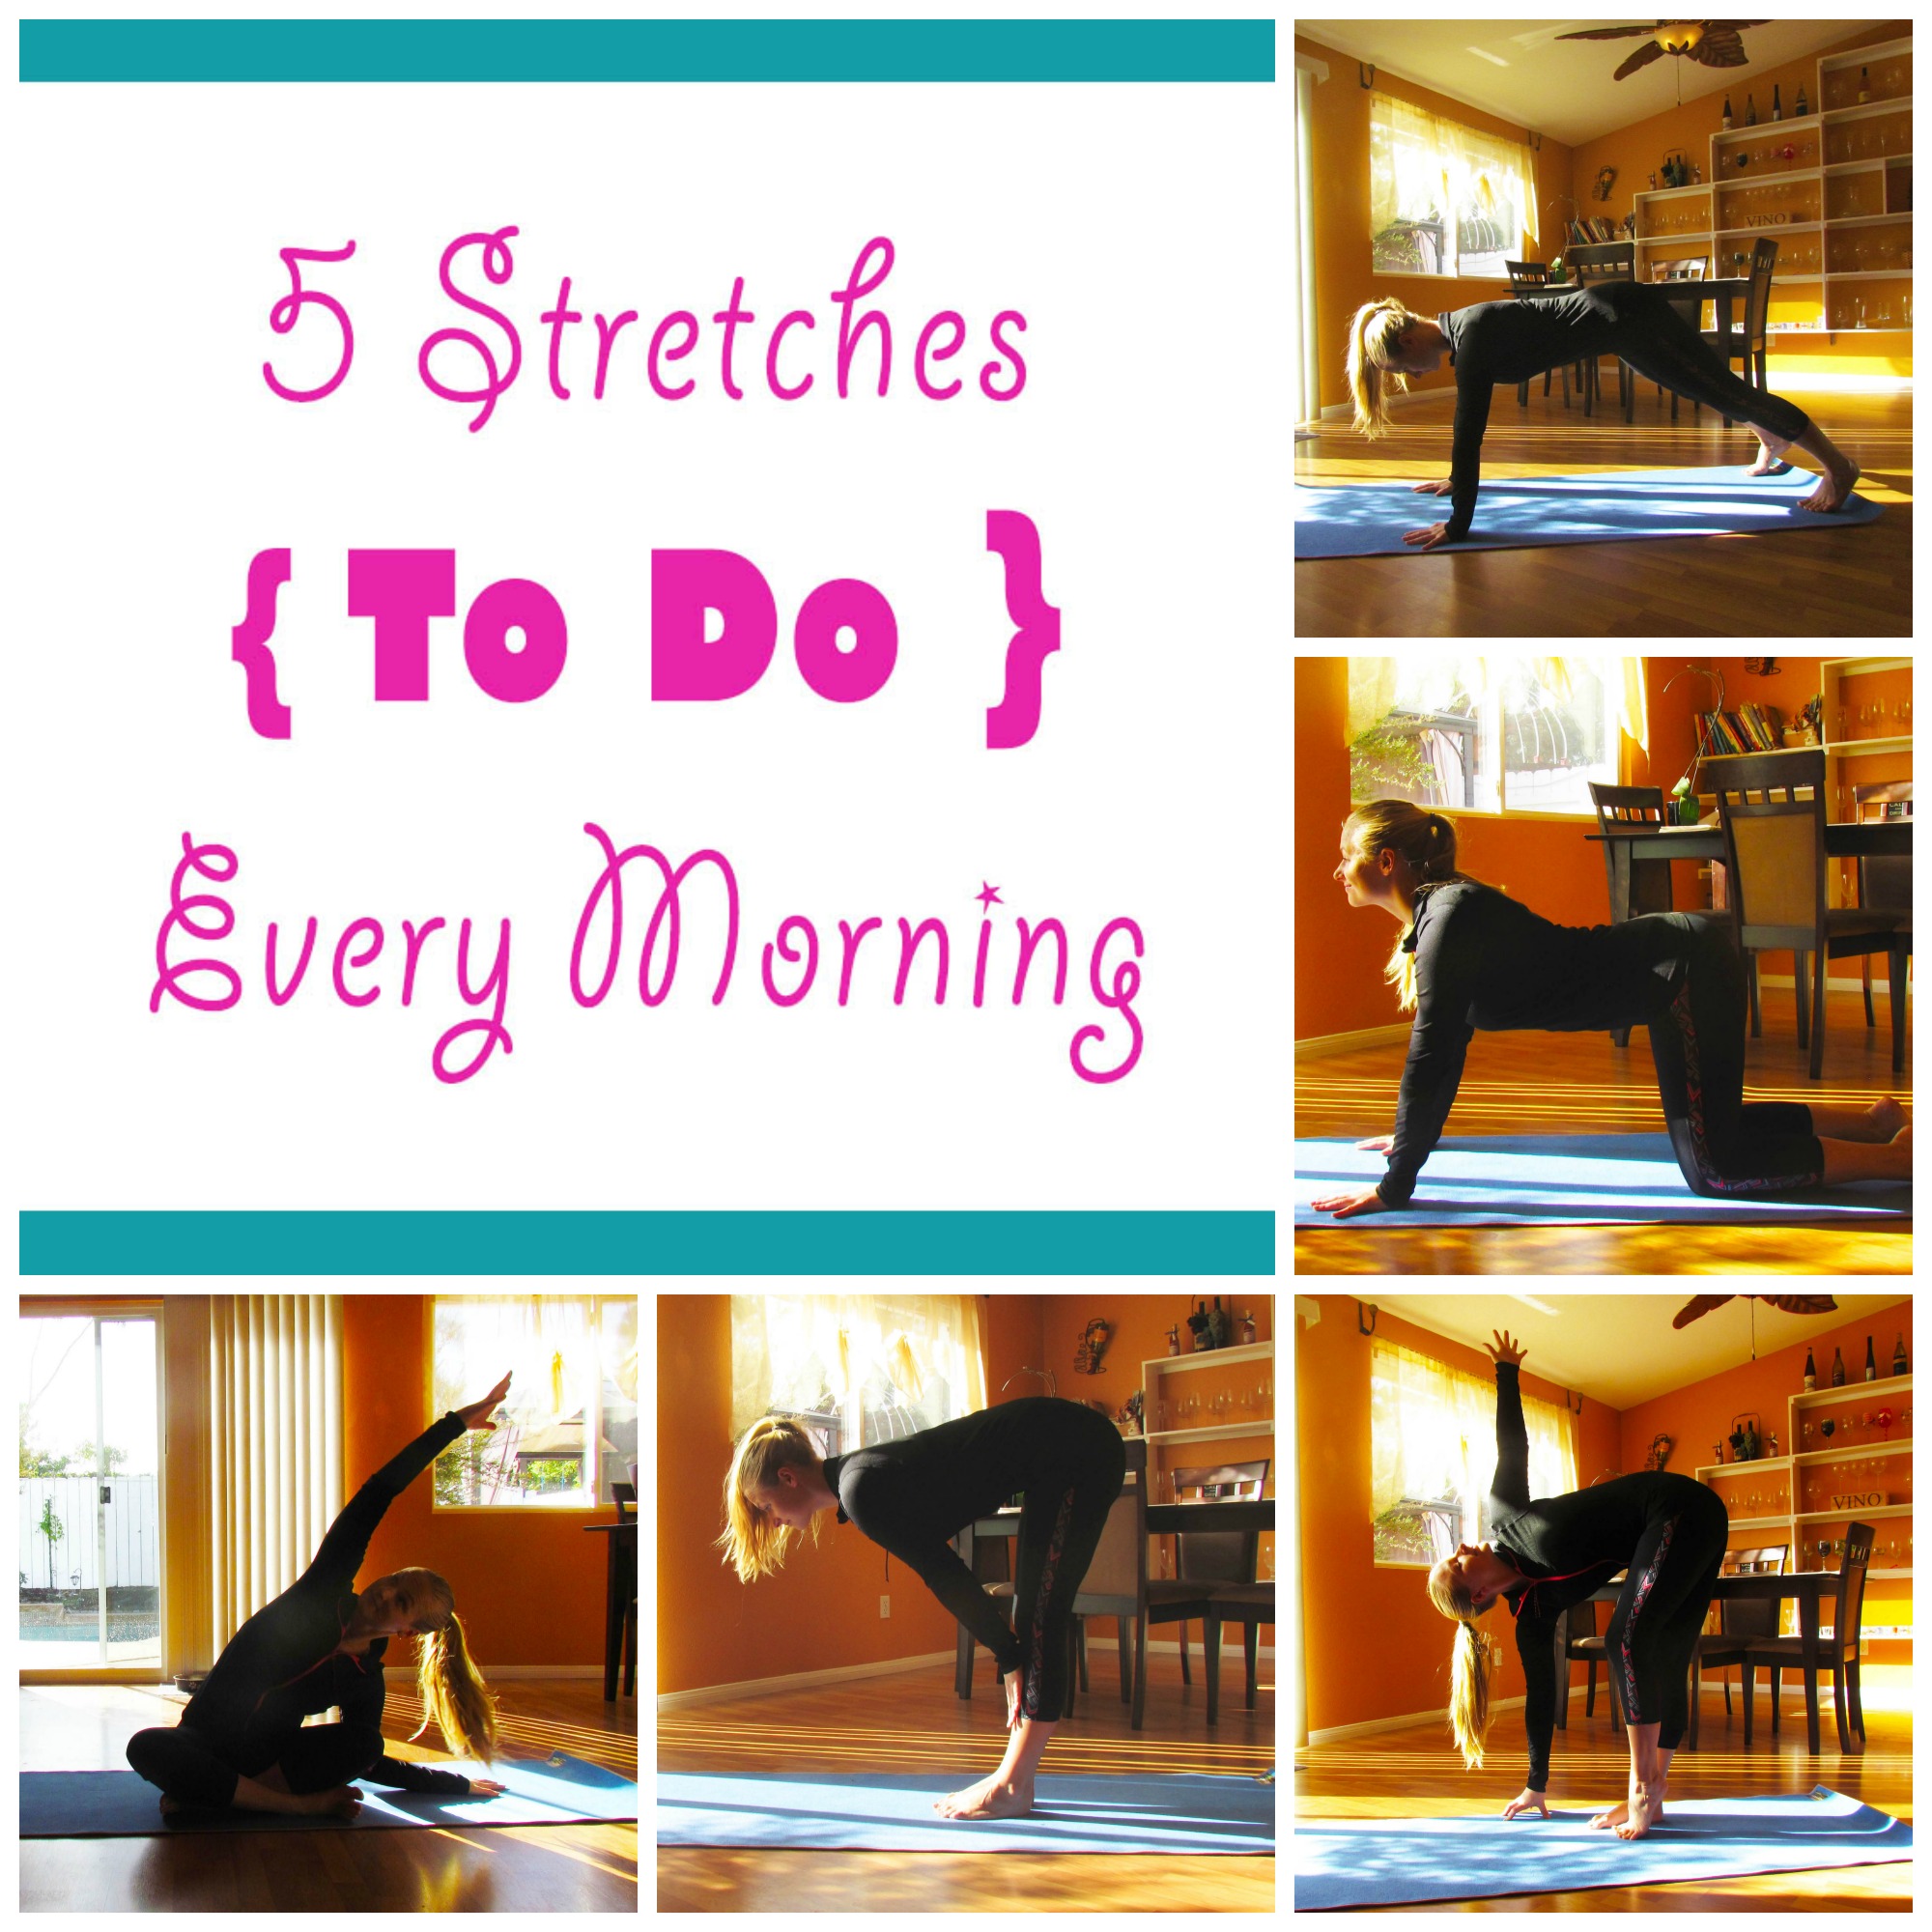 5-stretches-to-do-every-am